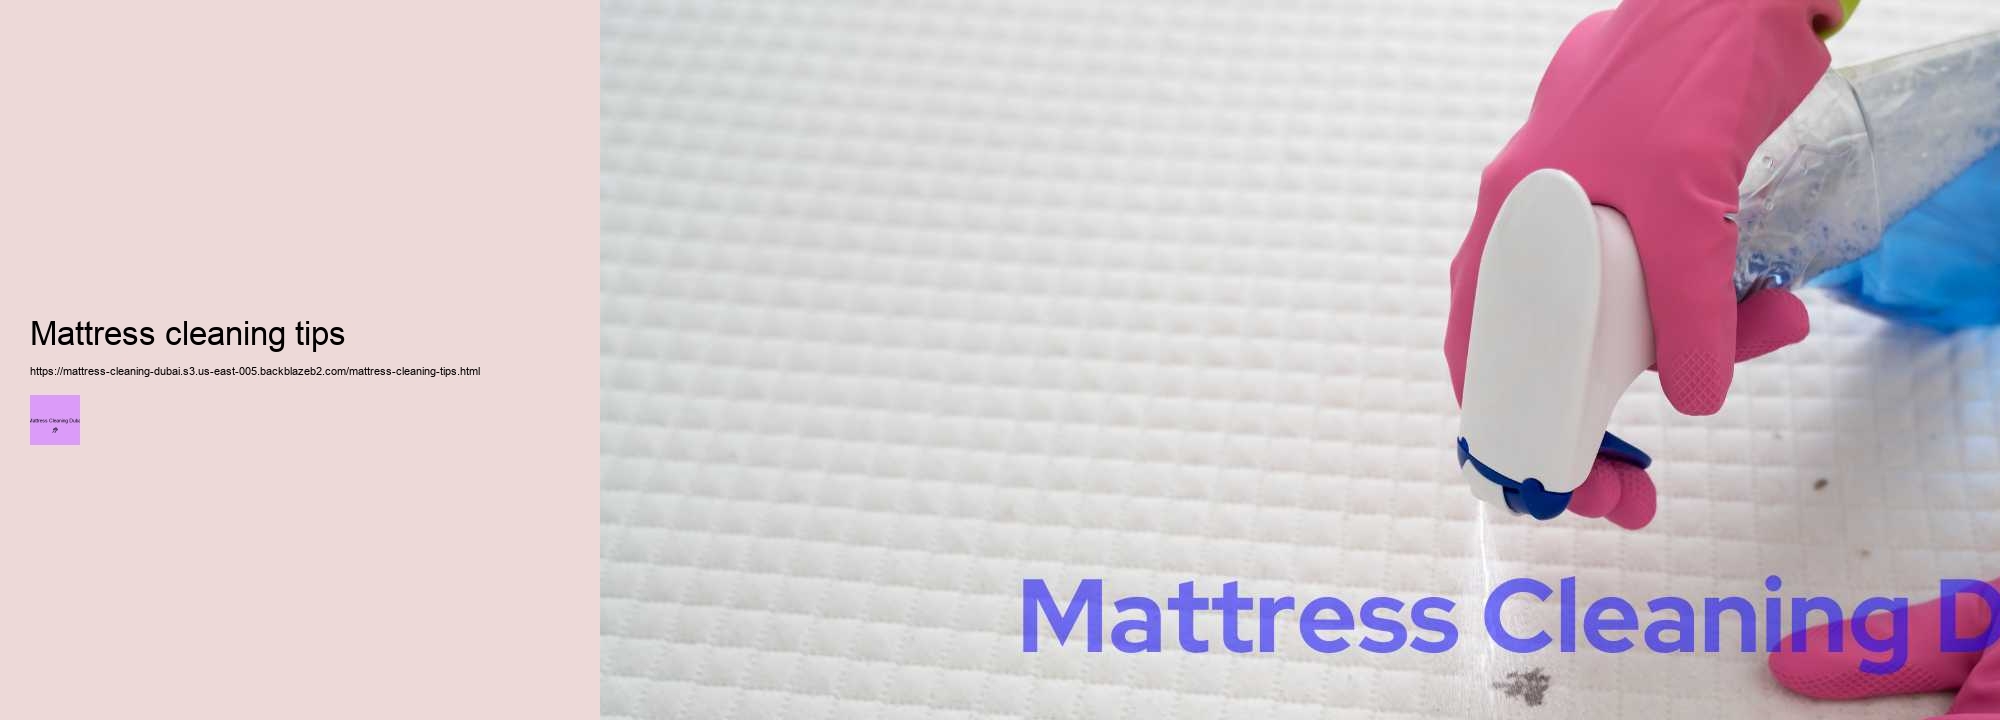 Mattress cleaning tips